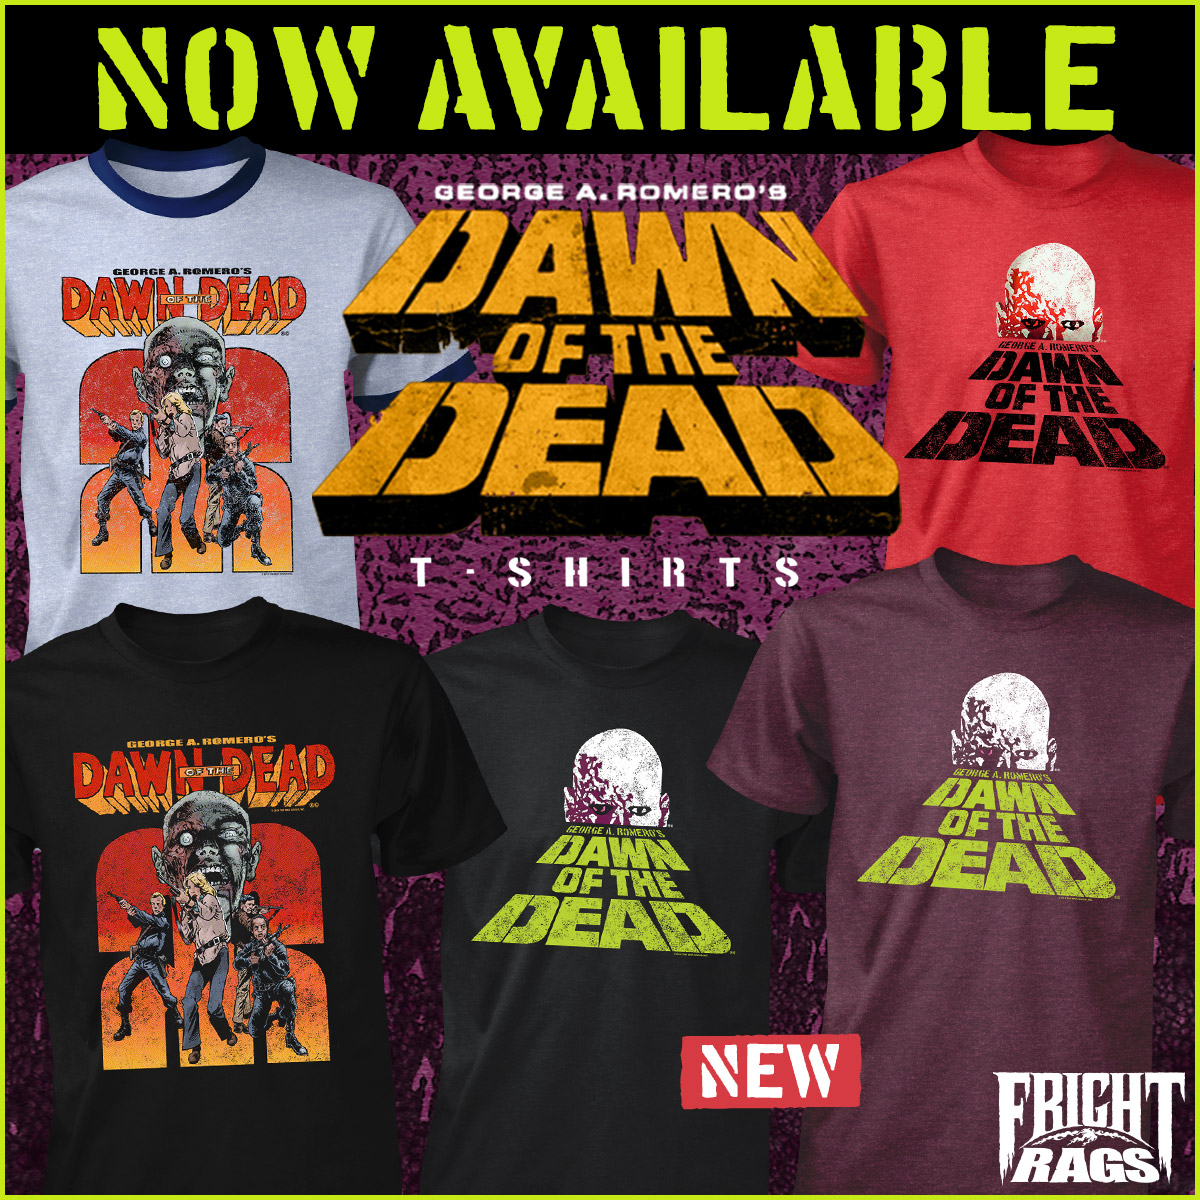 [News] Fright-Rags Lives It Up with RETURN OF THE LIVING DEAD & DAWN OF THE DEAD Apparel